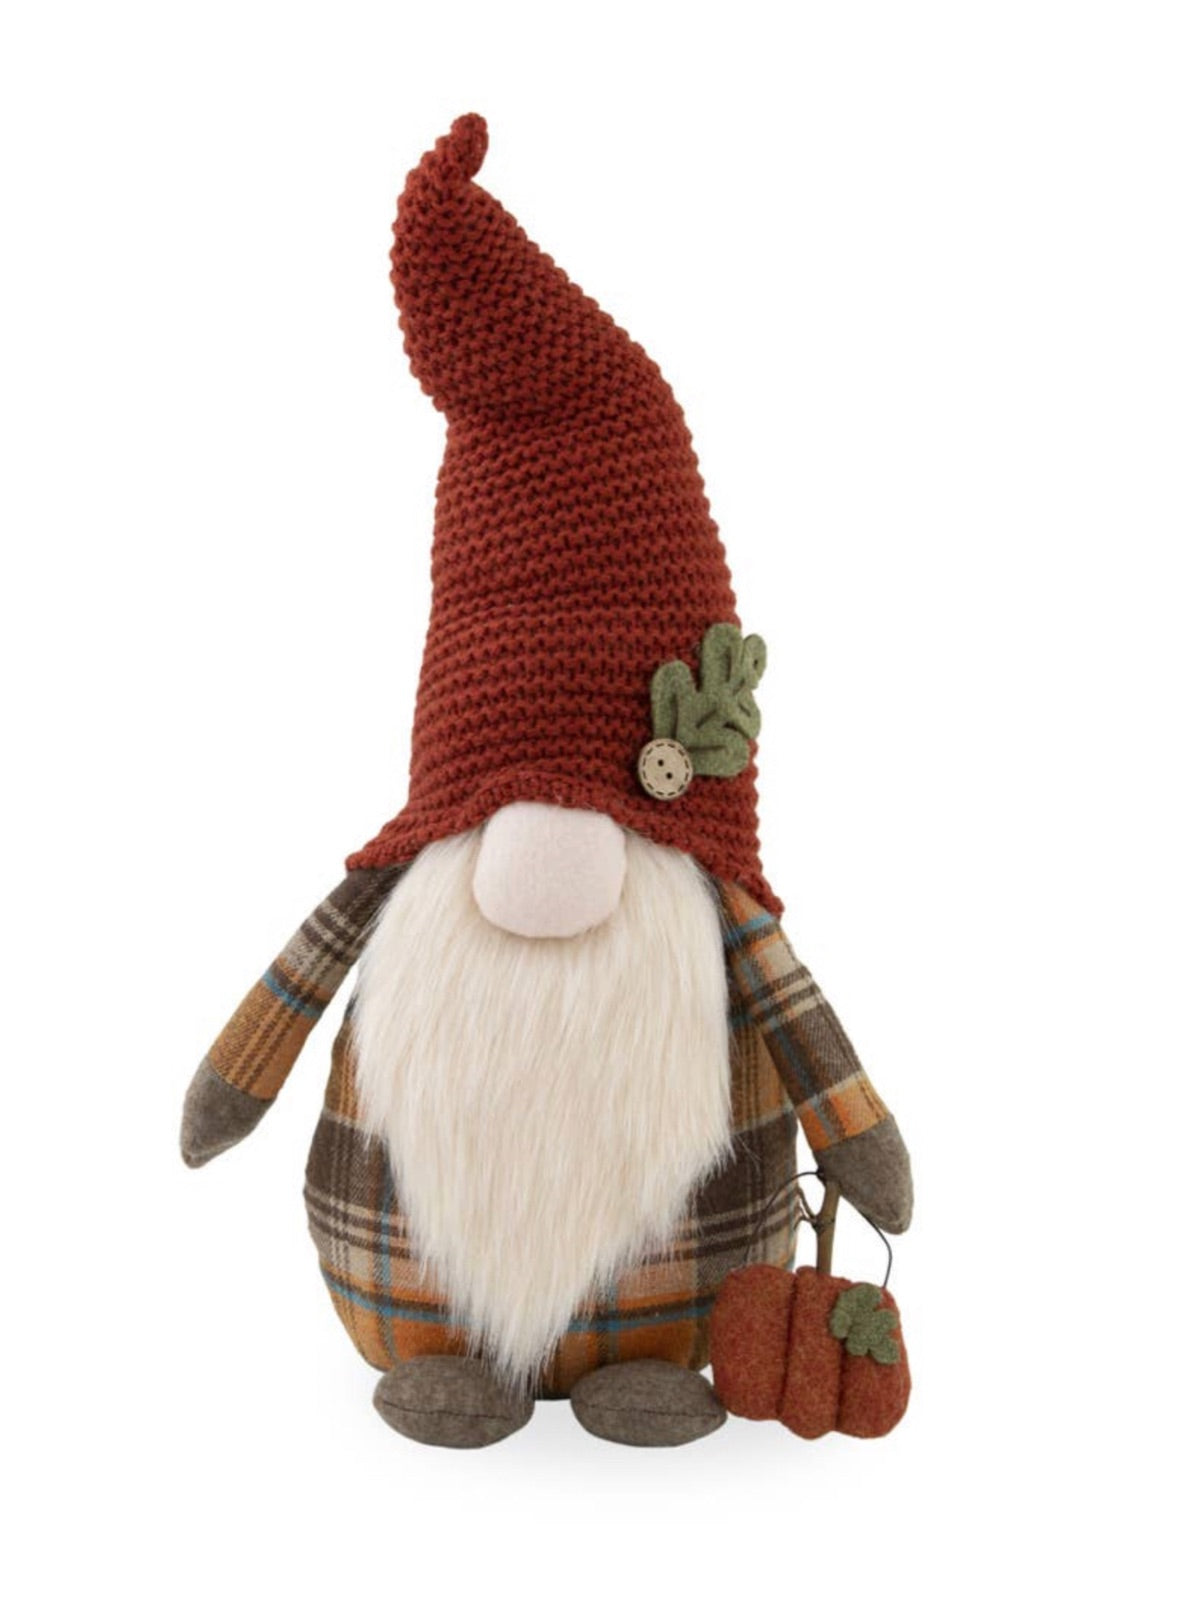 Get ready for the harvest season with the Cecil Autumn Plaid Gnome. Featuring rustic plaid print and a knit burgundy hat, this seasonal gnome looks perfect with your other decor or as an eye-catching centerpiece.